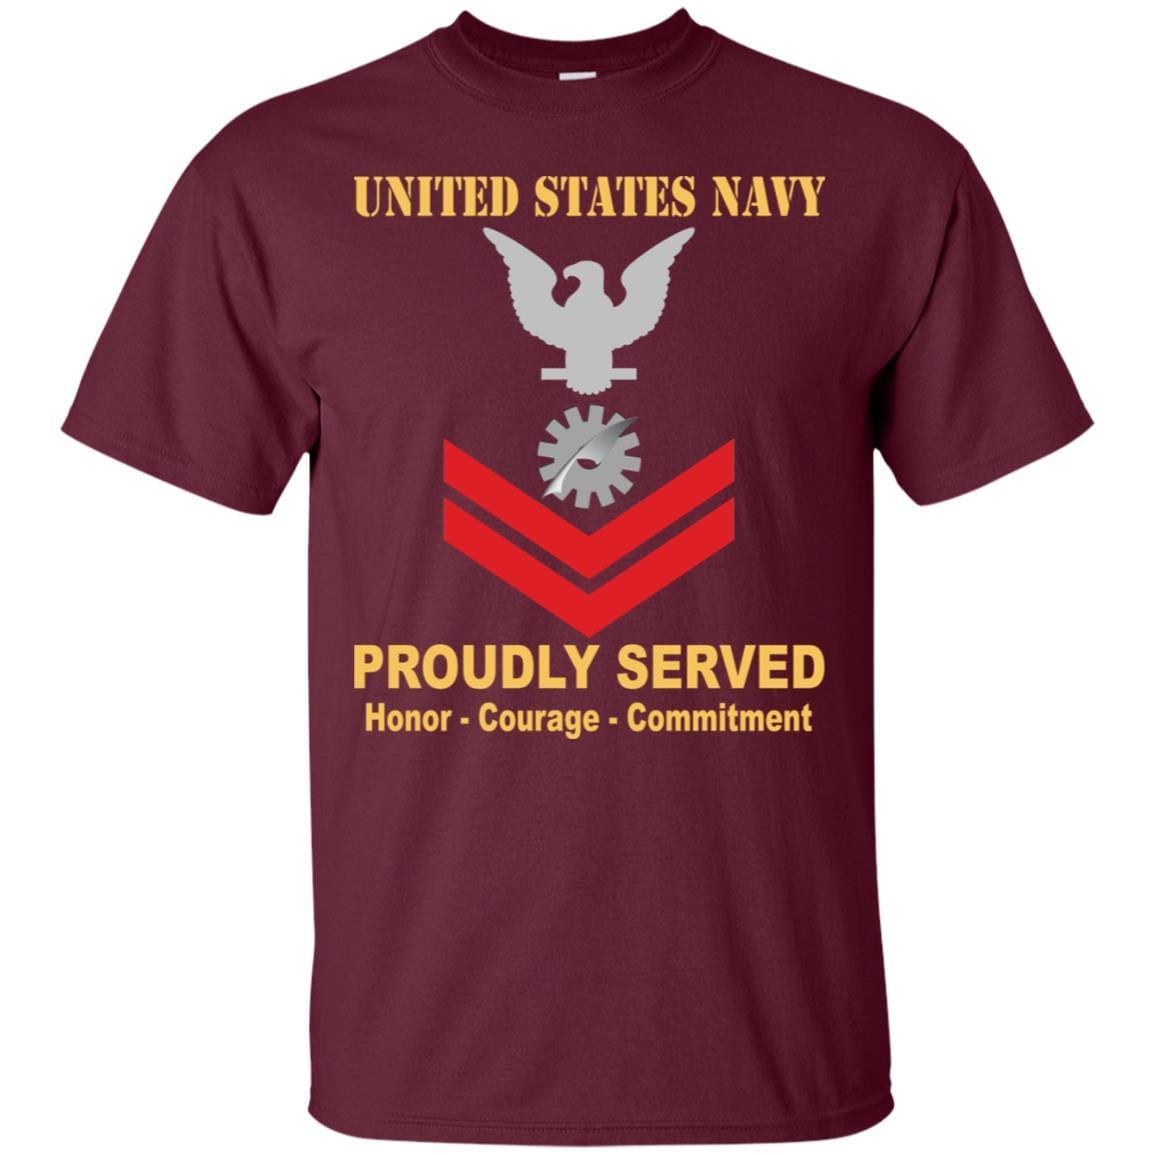 Navy Data Processing Technician Navy DP E-5 Rating Badges Proudly Served T-Shirt For Men On Front-TShirt-Navy-Veterans Nation